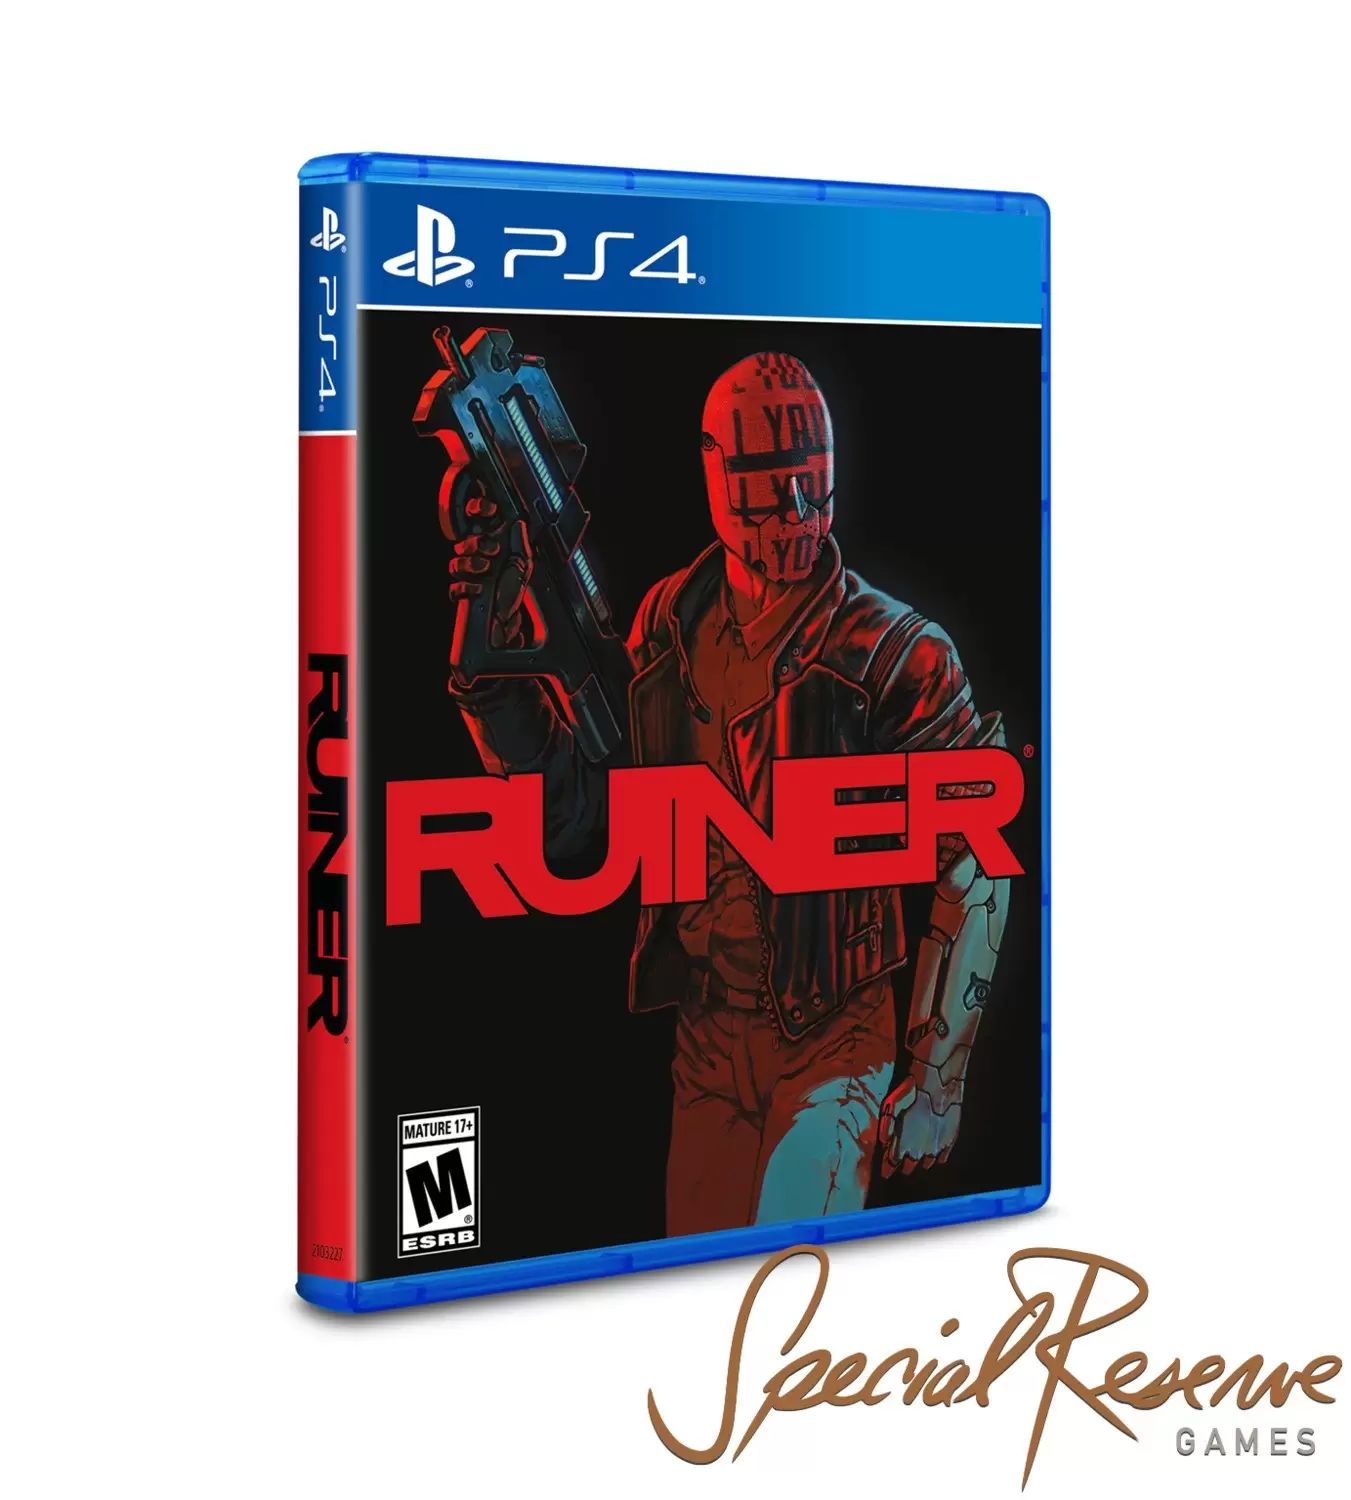 Jeux PS4 - Ruiner - Limited Run Games Exclusive Variant